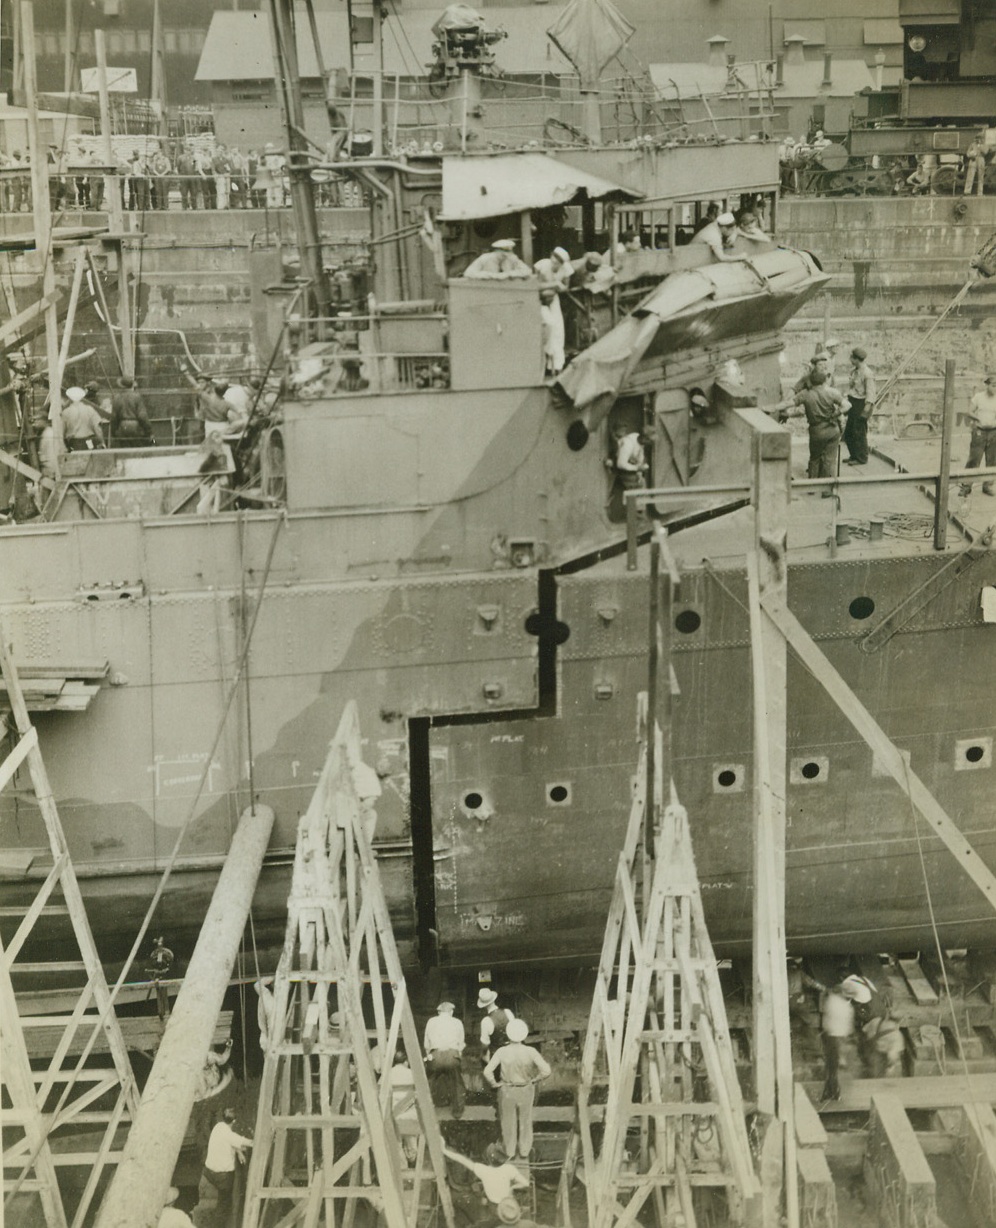 Jig-Saw Puzzle, 1/7/1943. Philadelphia, PA.—Fitting together as neatly as two parts of a jigsaw puzzle, the bow, cut from the decommissioned U.S.S. Taylor, is fitted to the U.S.S. Blakeley, her sister ship. The Blakeley, an old four-stacker destroyer, was badly damaged by an enemy torpedo last May. Grafting parts of her sister ship to the damanged destroyer, Navy workmen have turned the hardy vessel back to sea, good as new, with a greater firepower and cruising radius than she had before. Credit: Official U.S. Navy photo from ACME.;